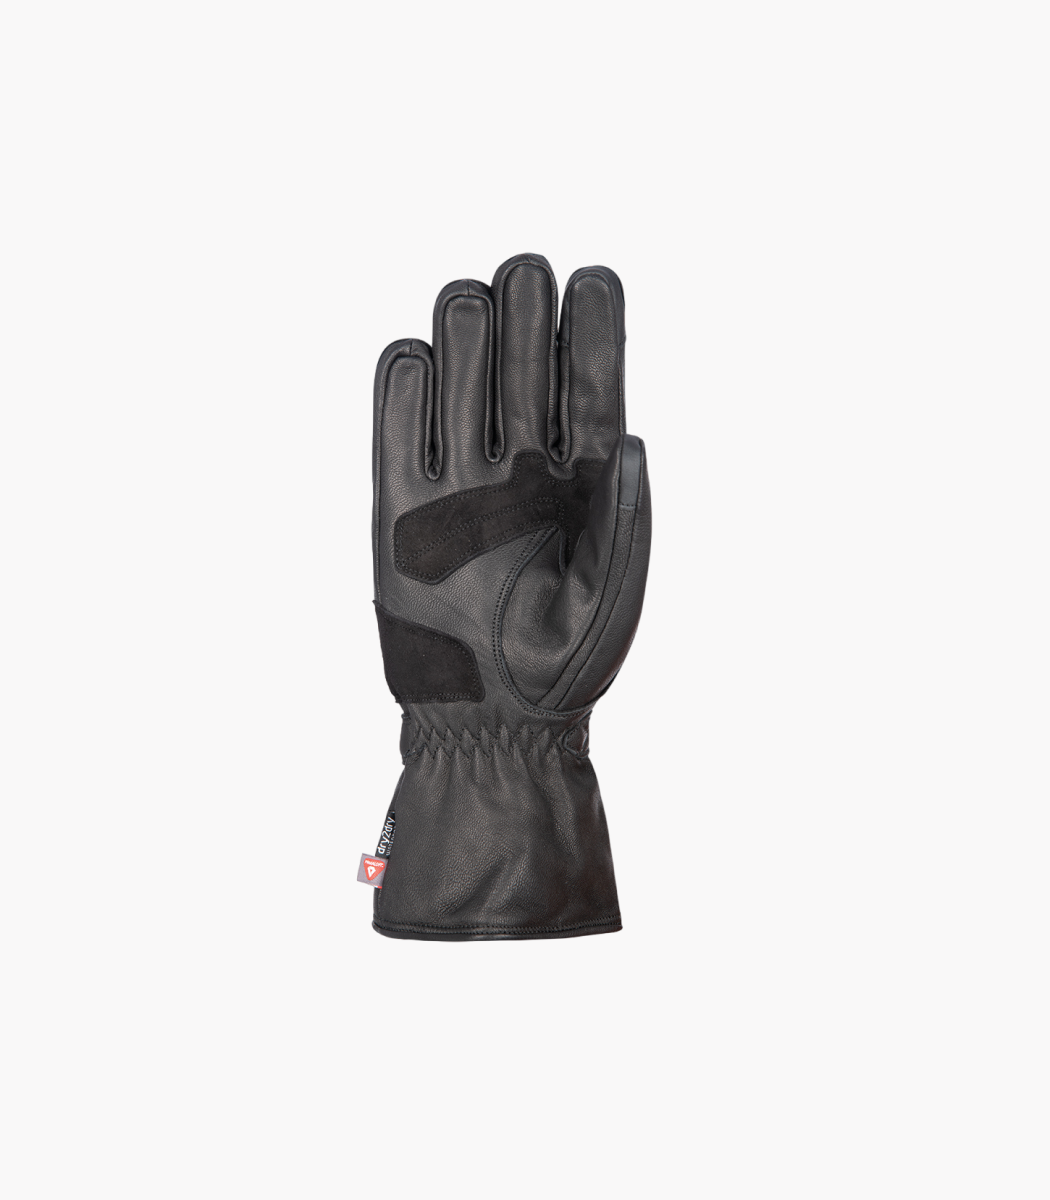 OXFORD HOLTON WP MS LEATHER GLOVE - BLACK